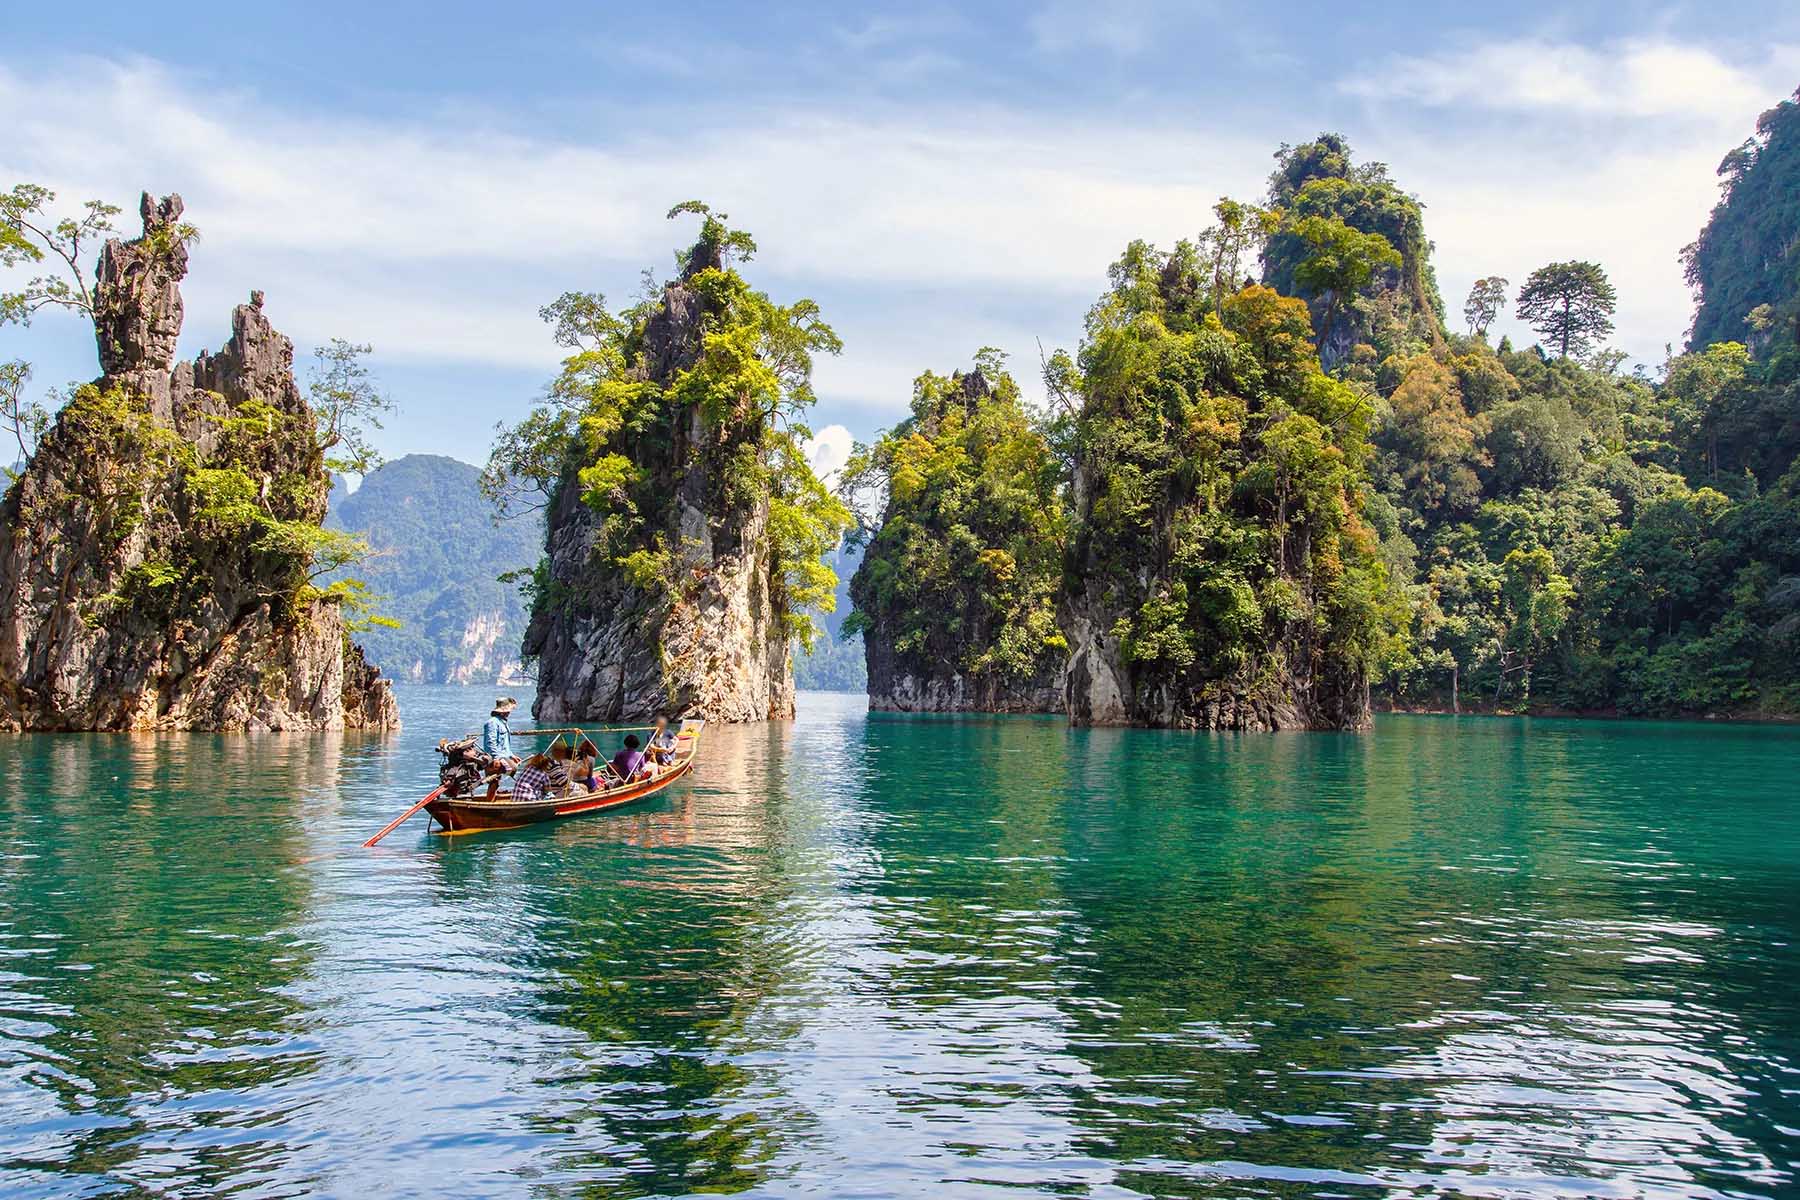 A small boat with tourists sails a lake in the Khao Sok National Park, where emerald waters and small islands are some of its main attractions.